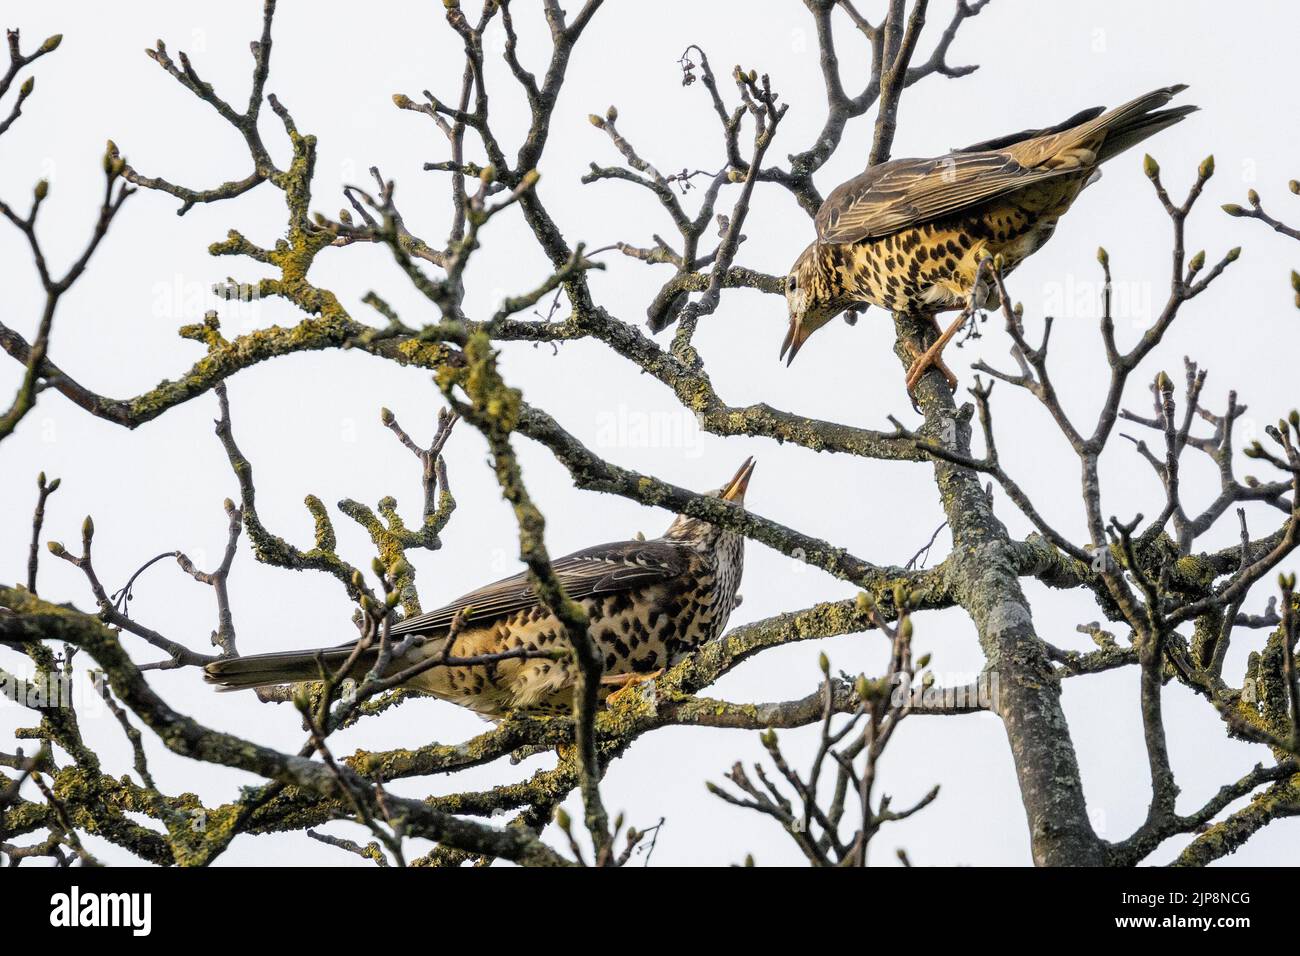 Two mistle thrushes, Turdus viscivorus, looking at each other perched in a tree Stock Photo